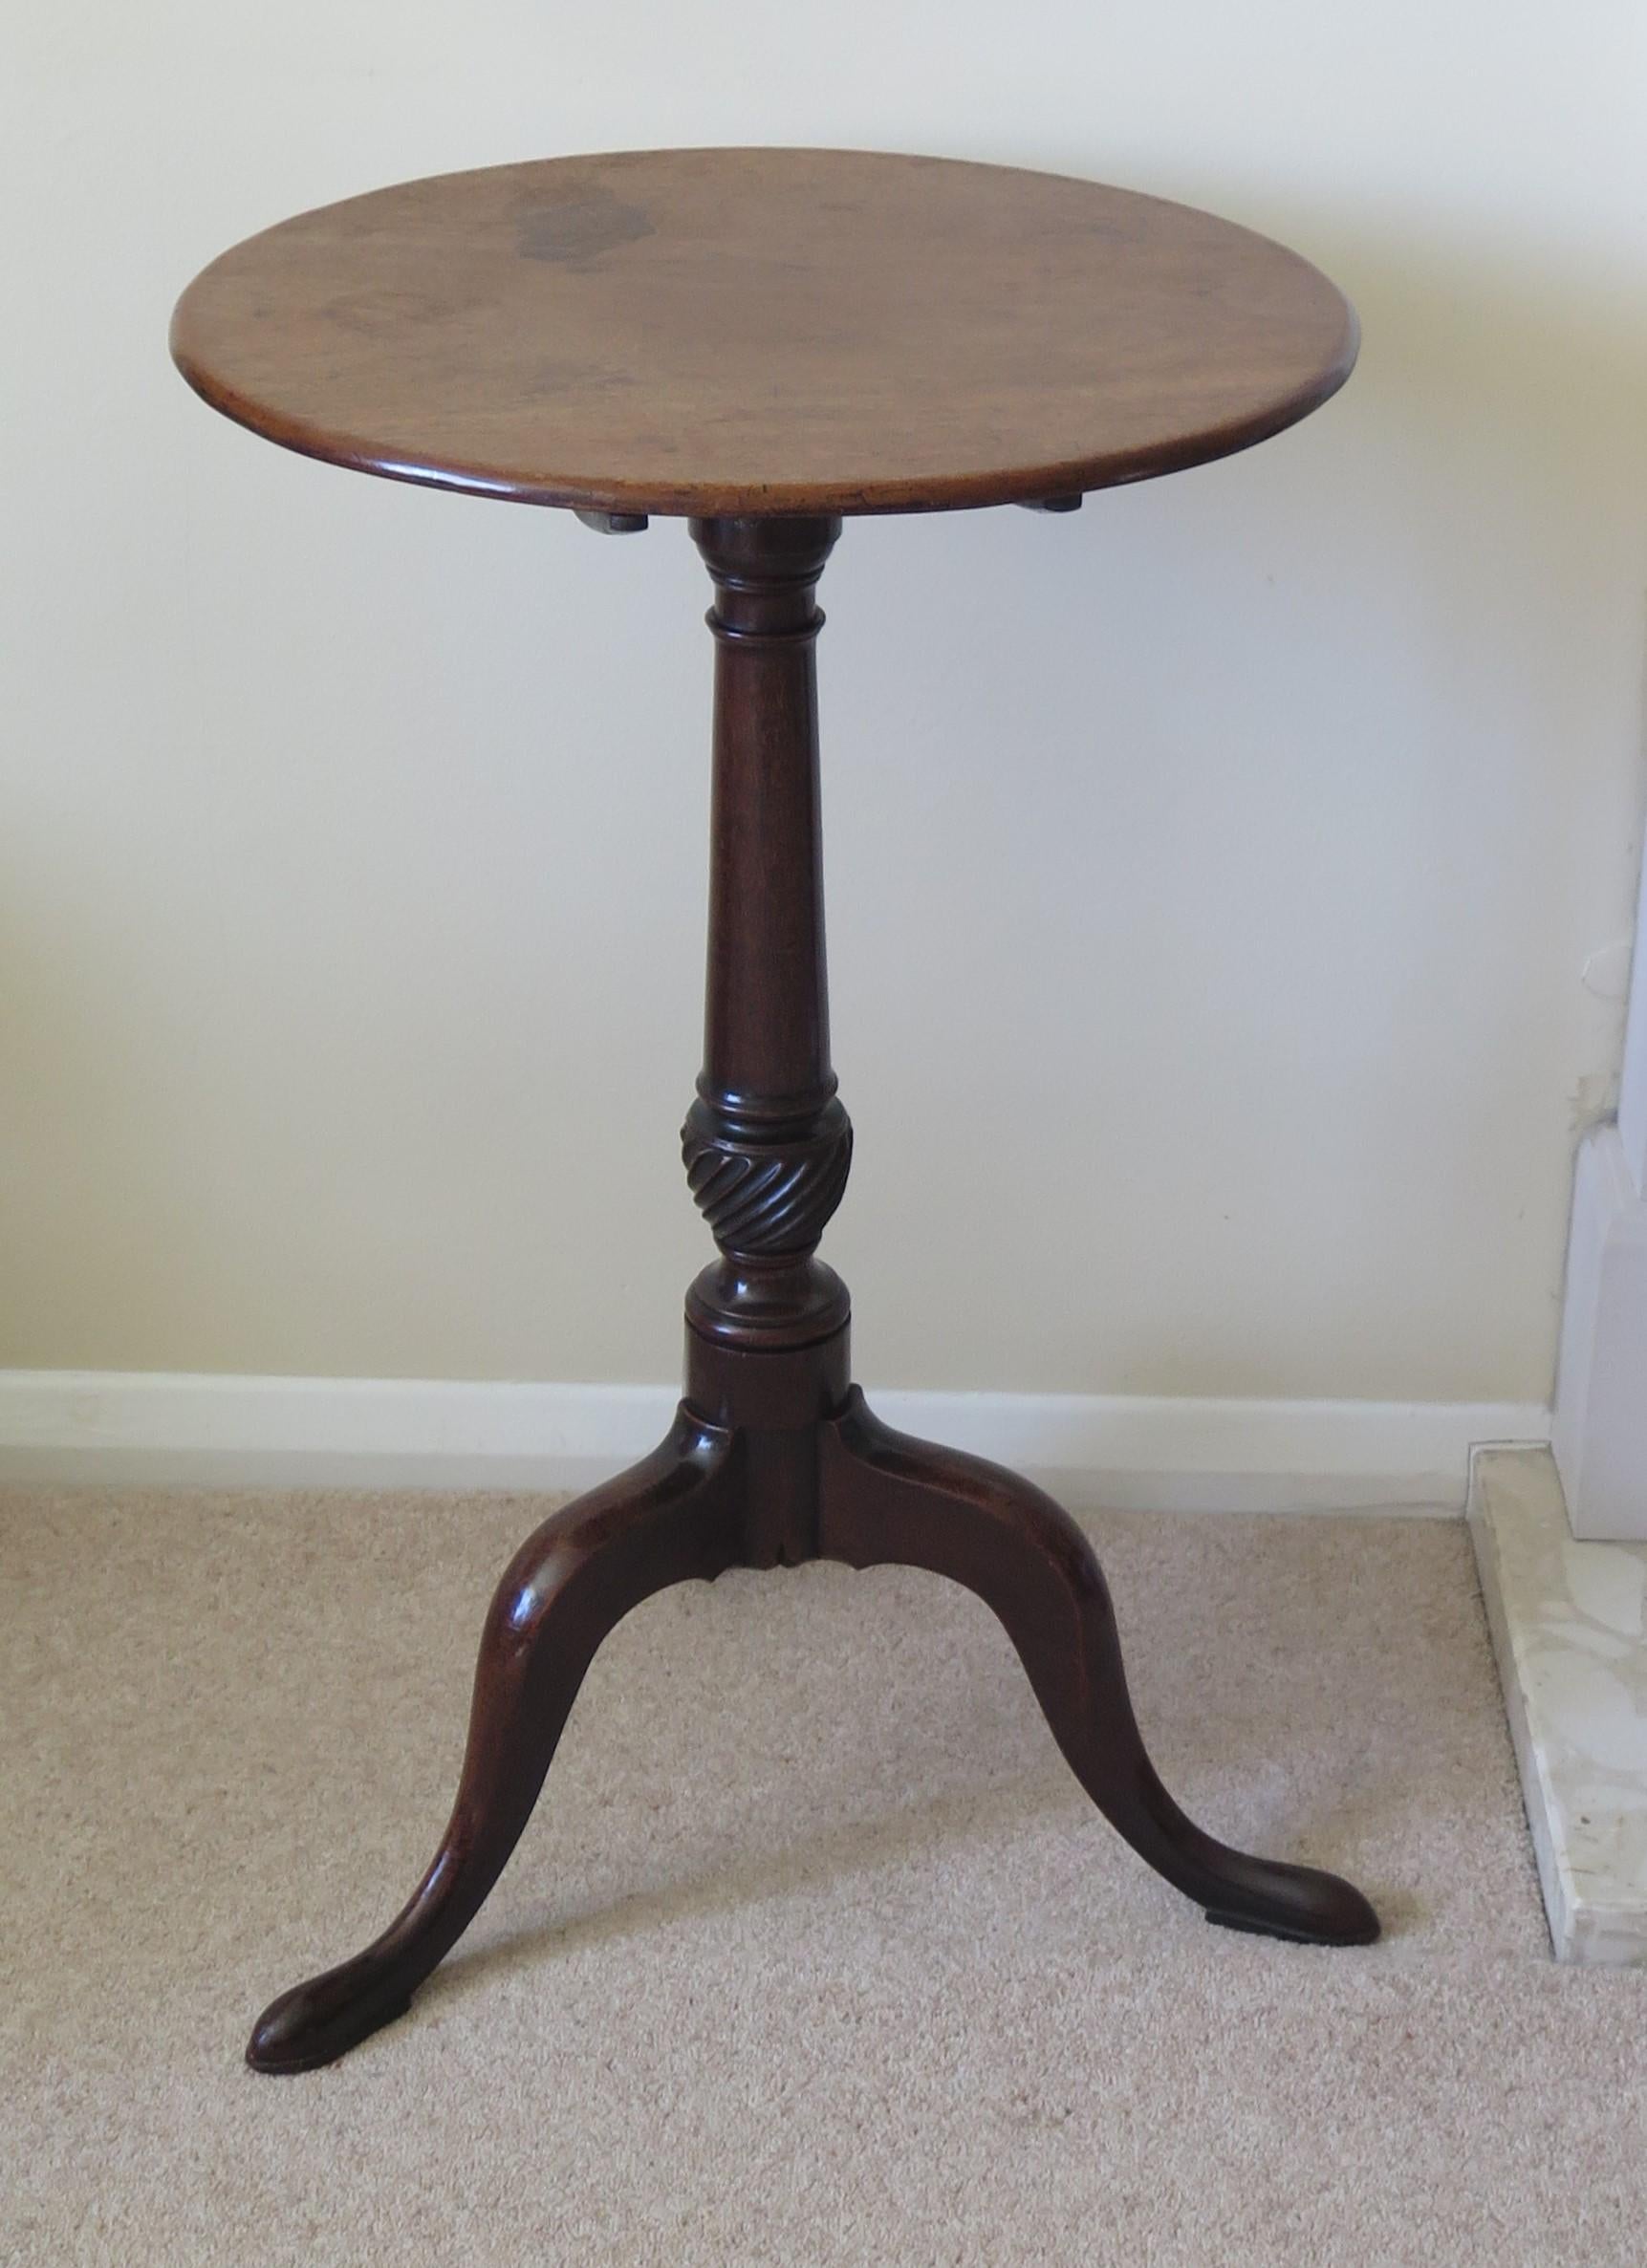 This is an elegant and beautifully proportioned solid hardwood, tripod table or wine table with a tilting top and dates to the Mid Georgian Chippendale period, circa 1760.

The circular top is made from one-piece of solid hardwood, possibly walnut